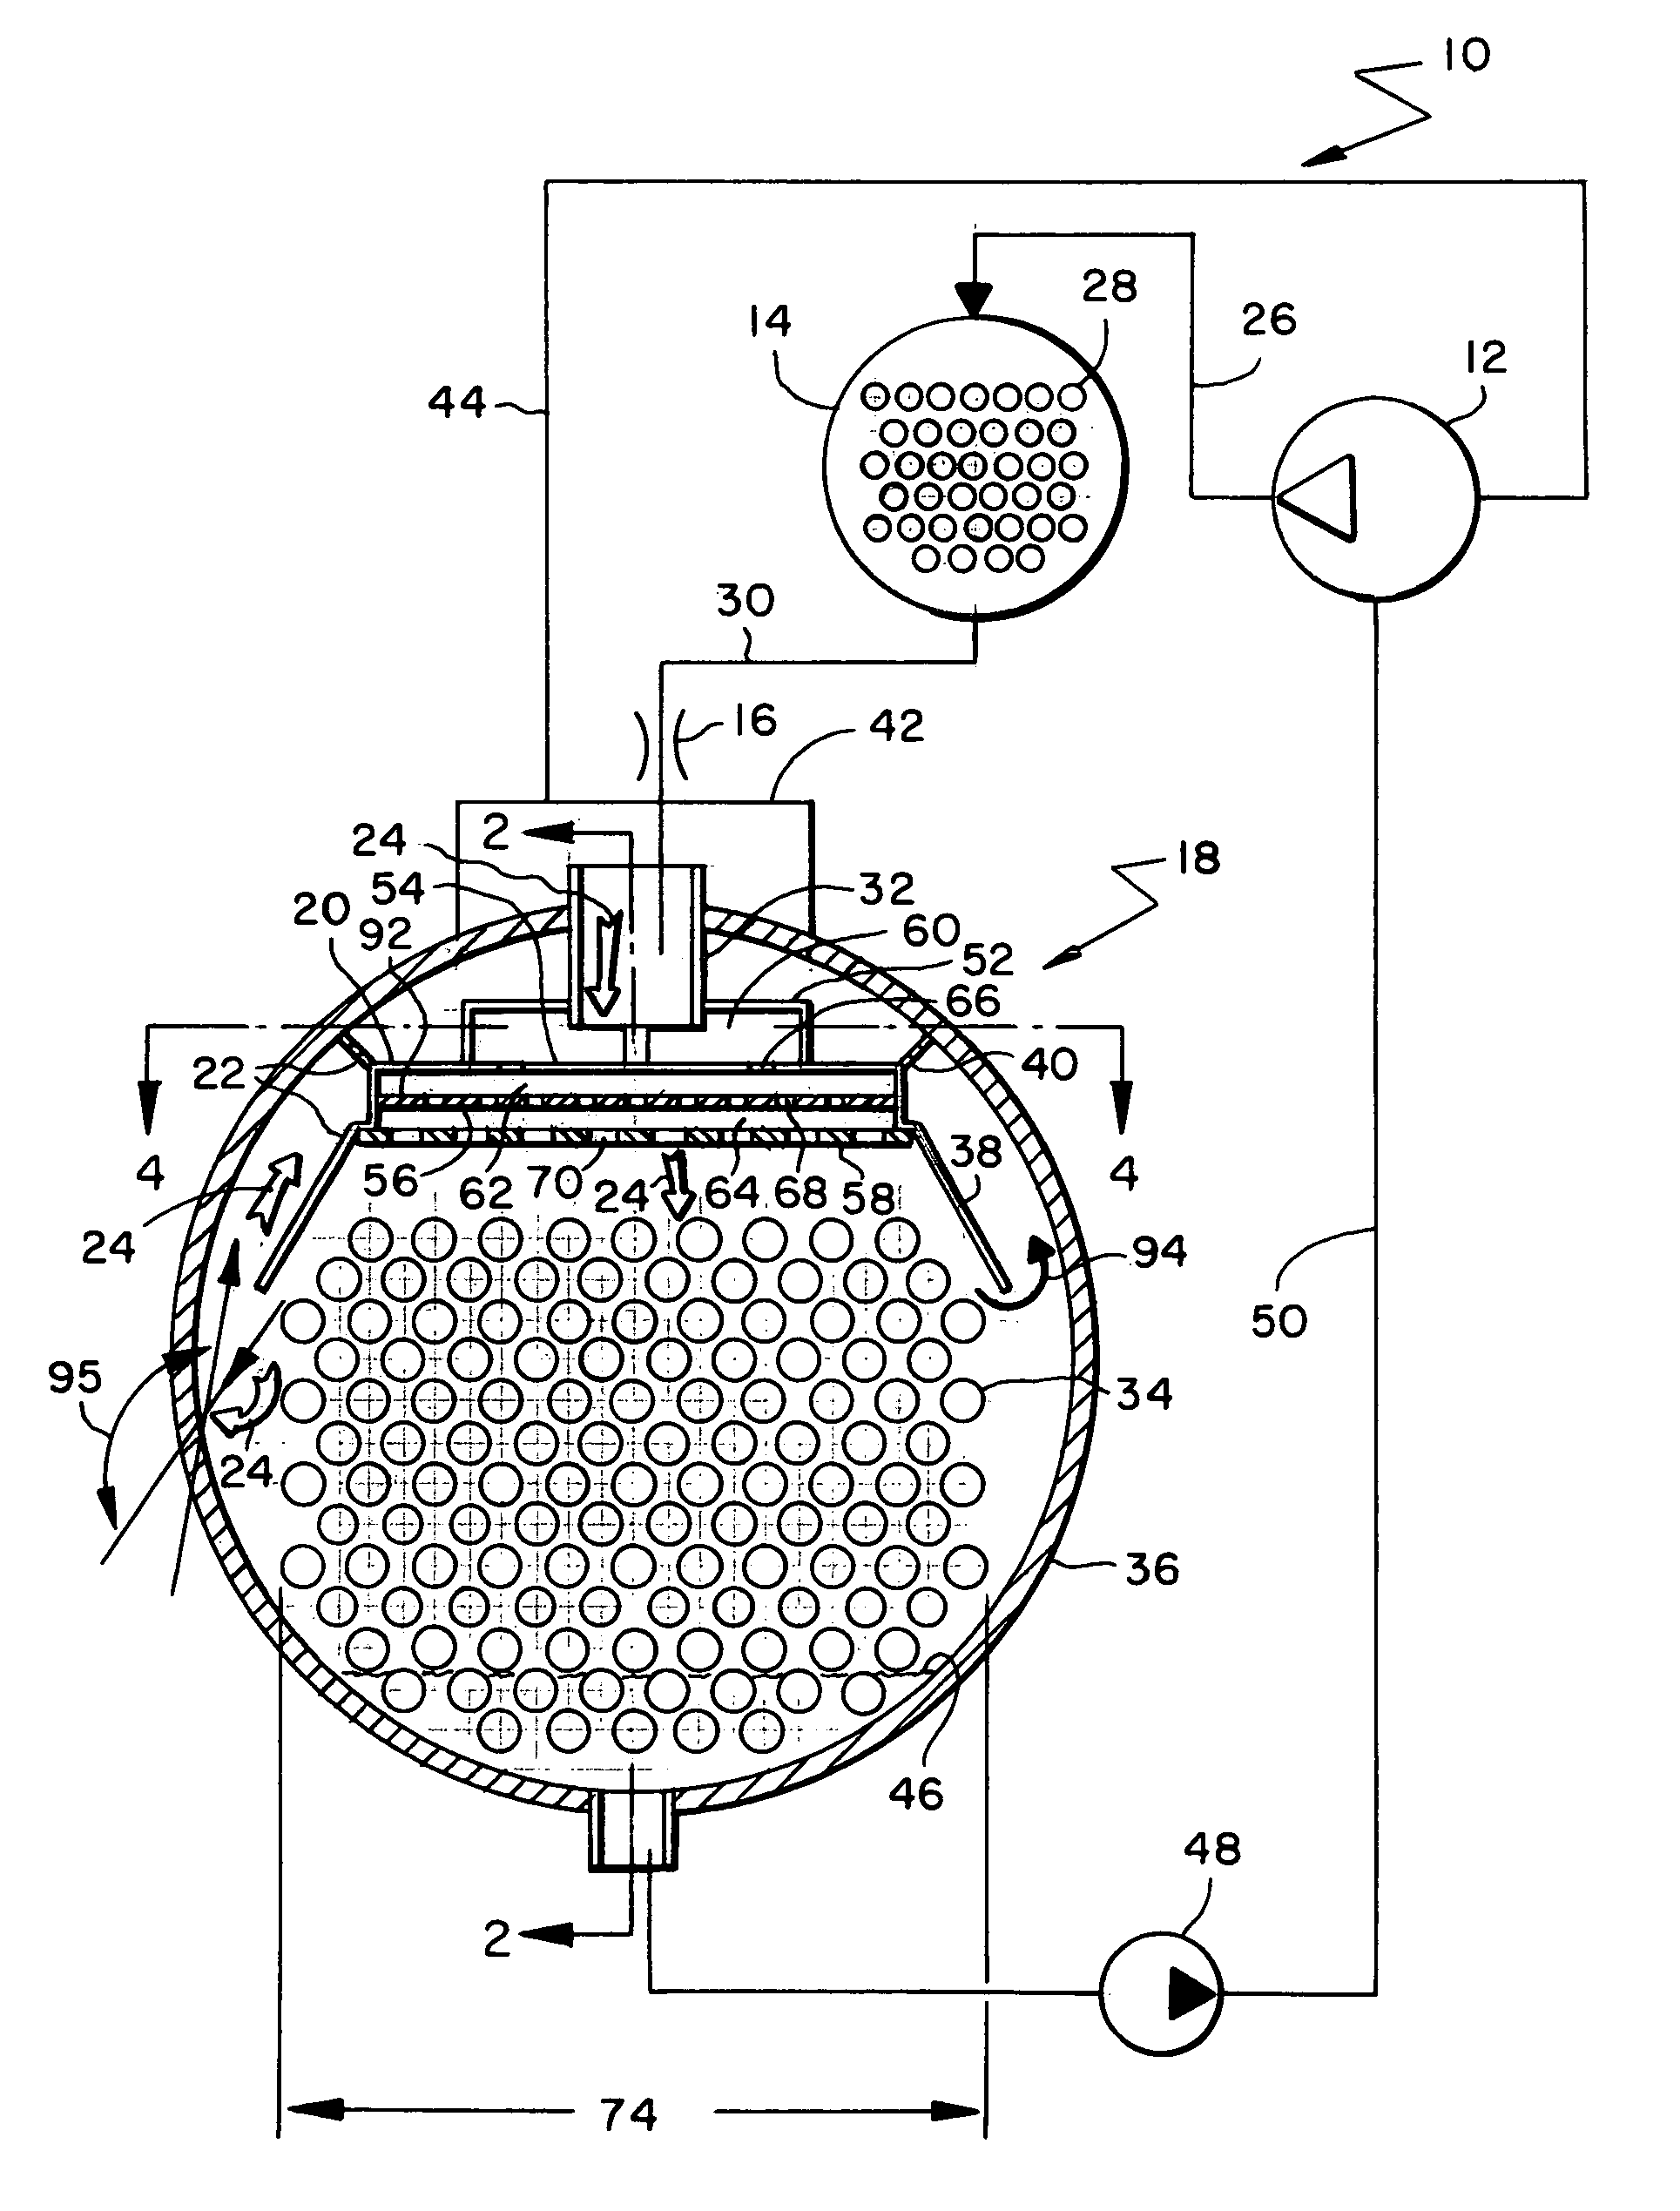 Flow distributor and baffle system for a falling film evaporator